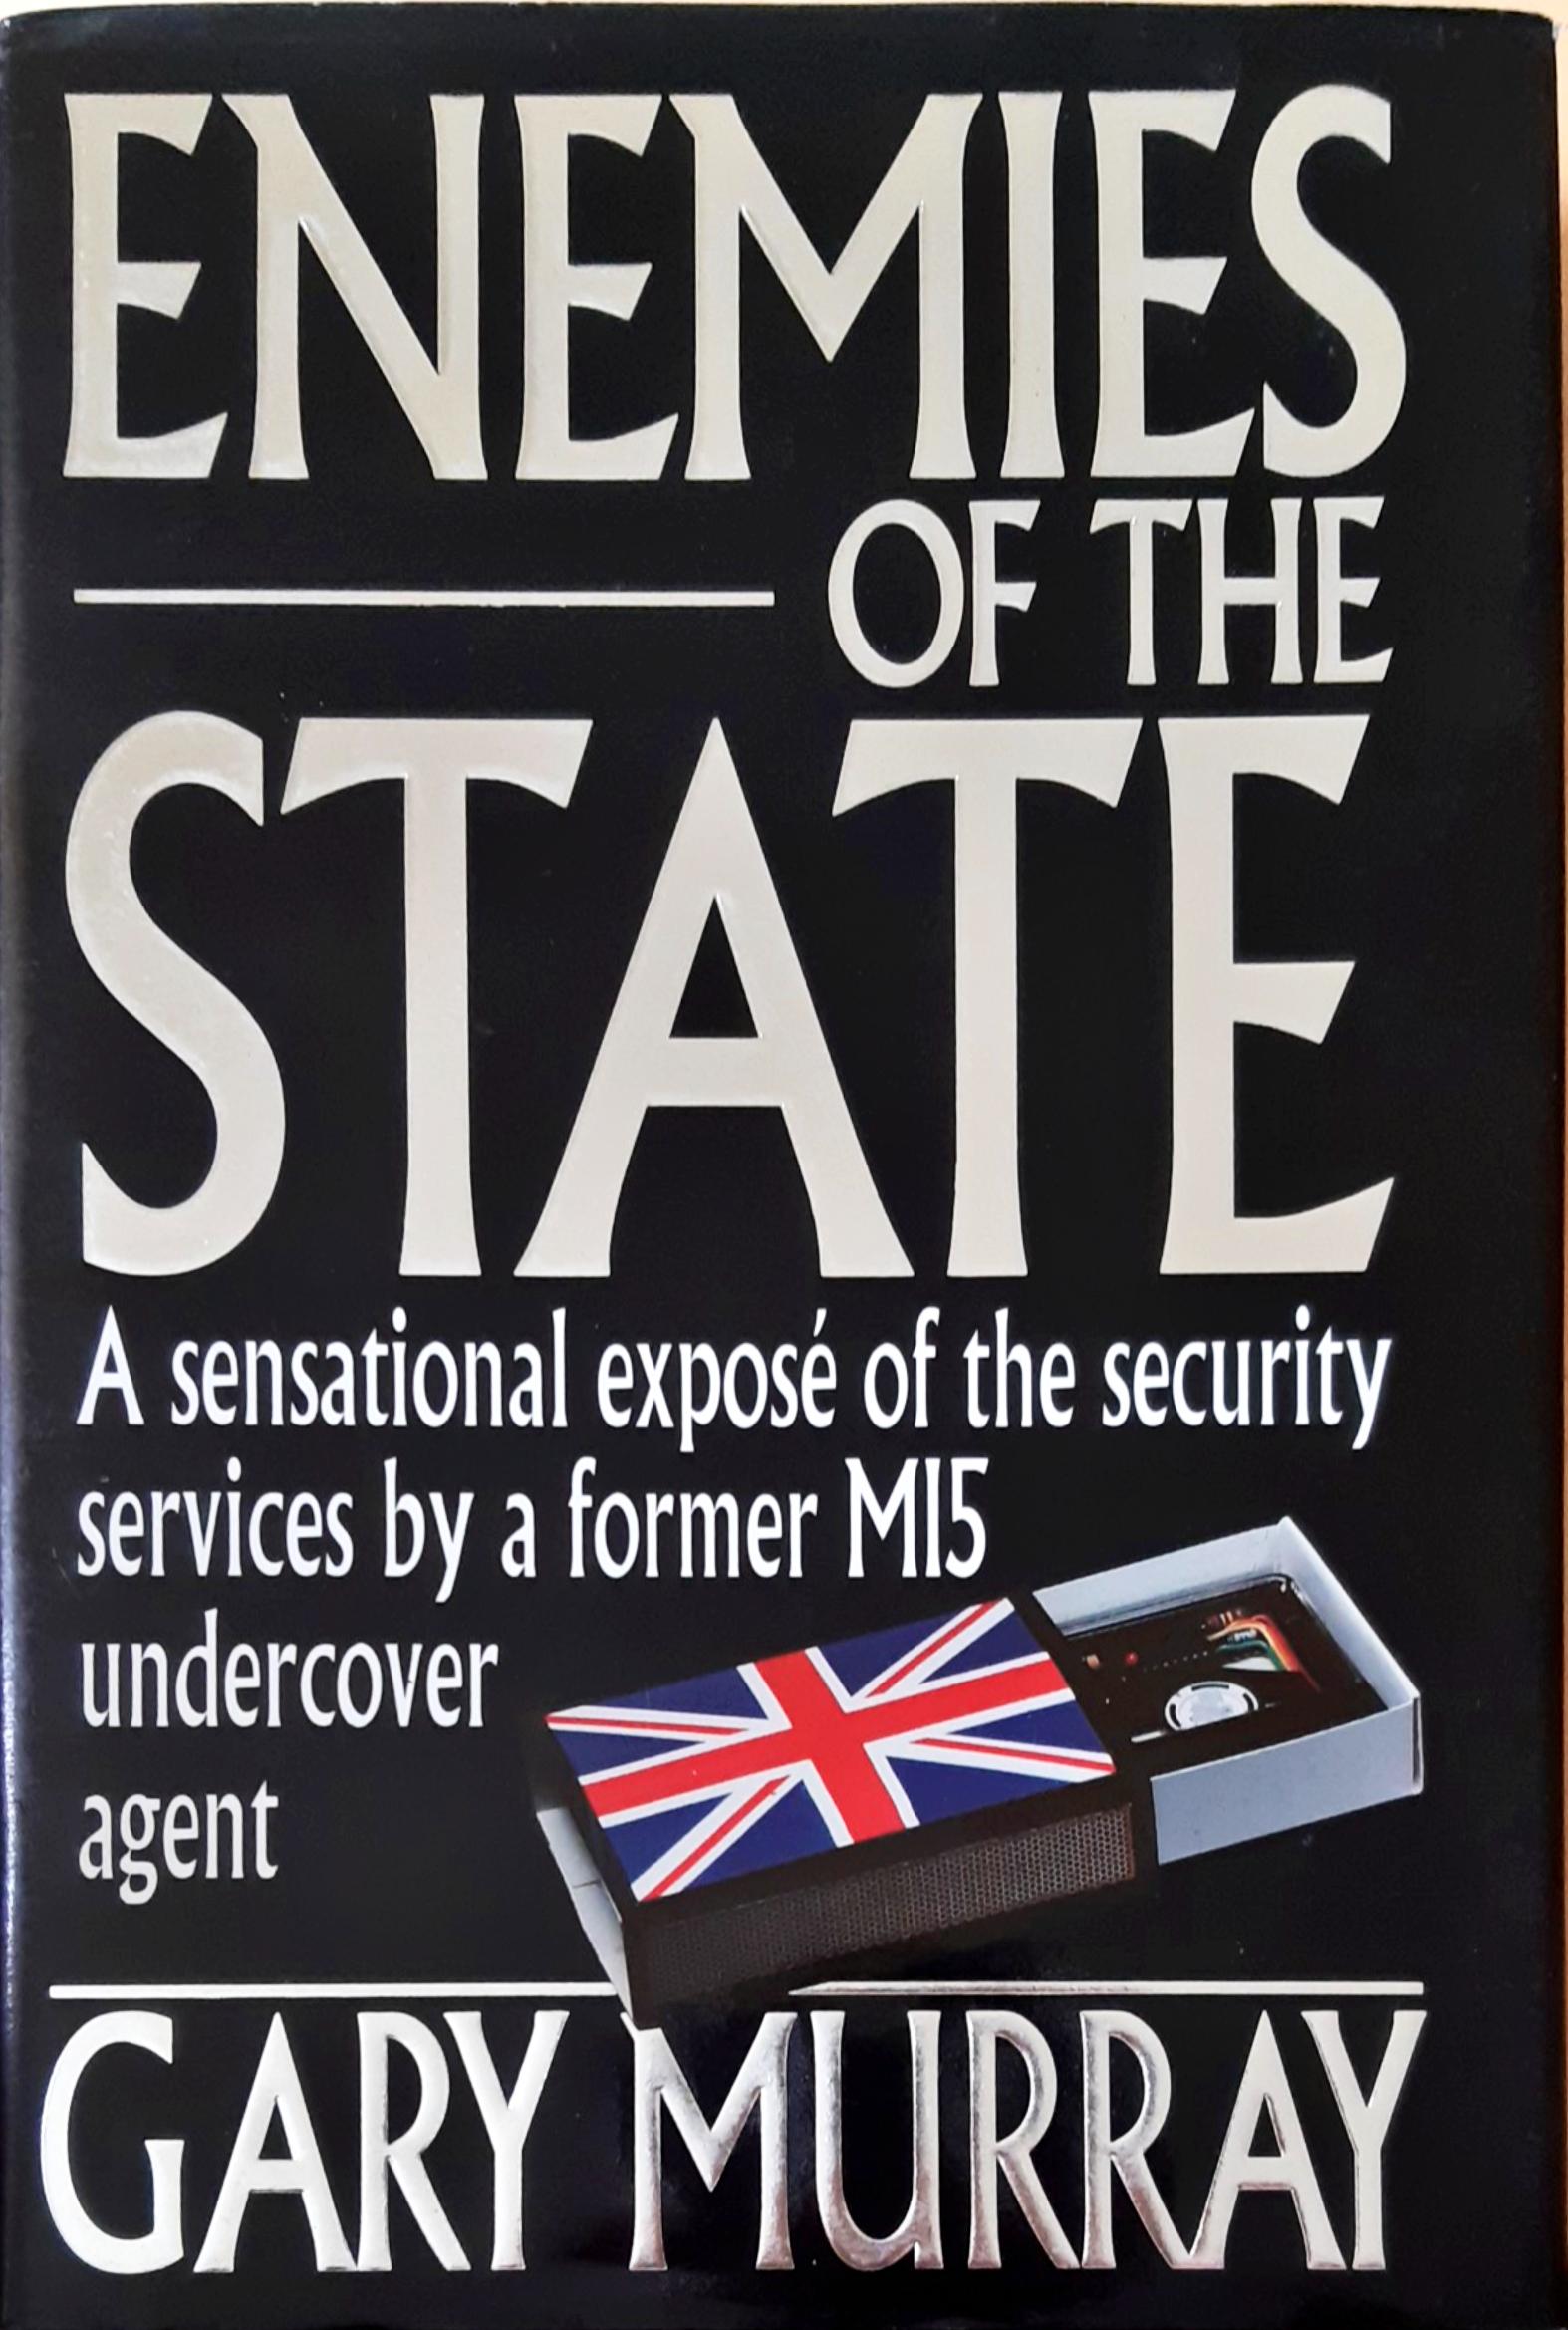 Enemies of the State: A Sensational Expose of the Security Services